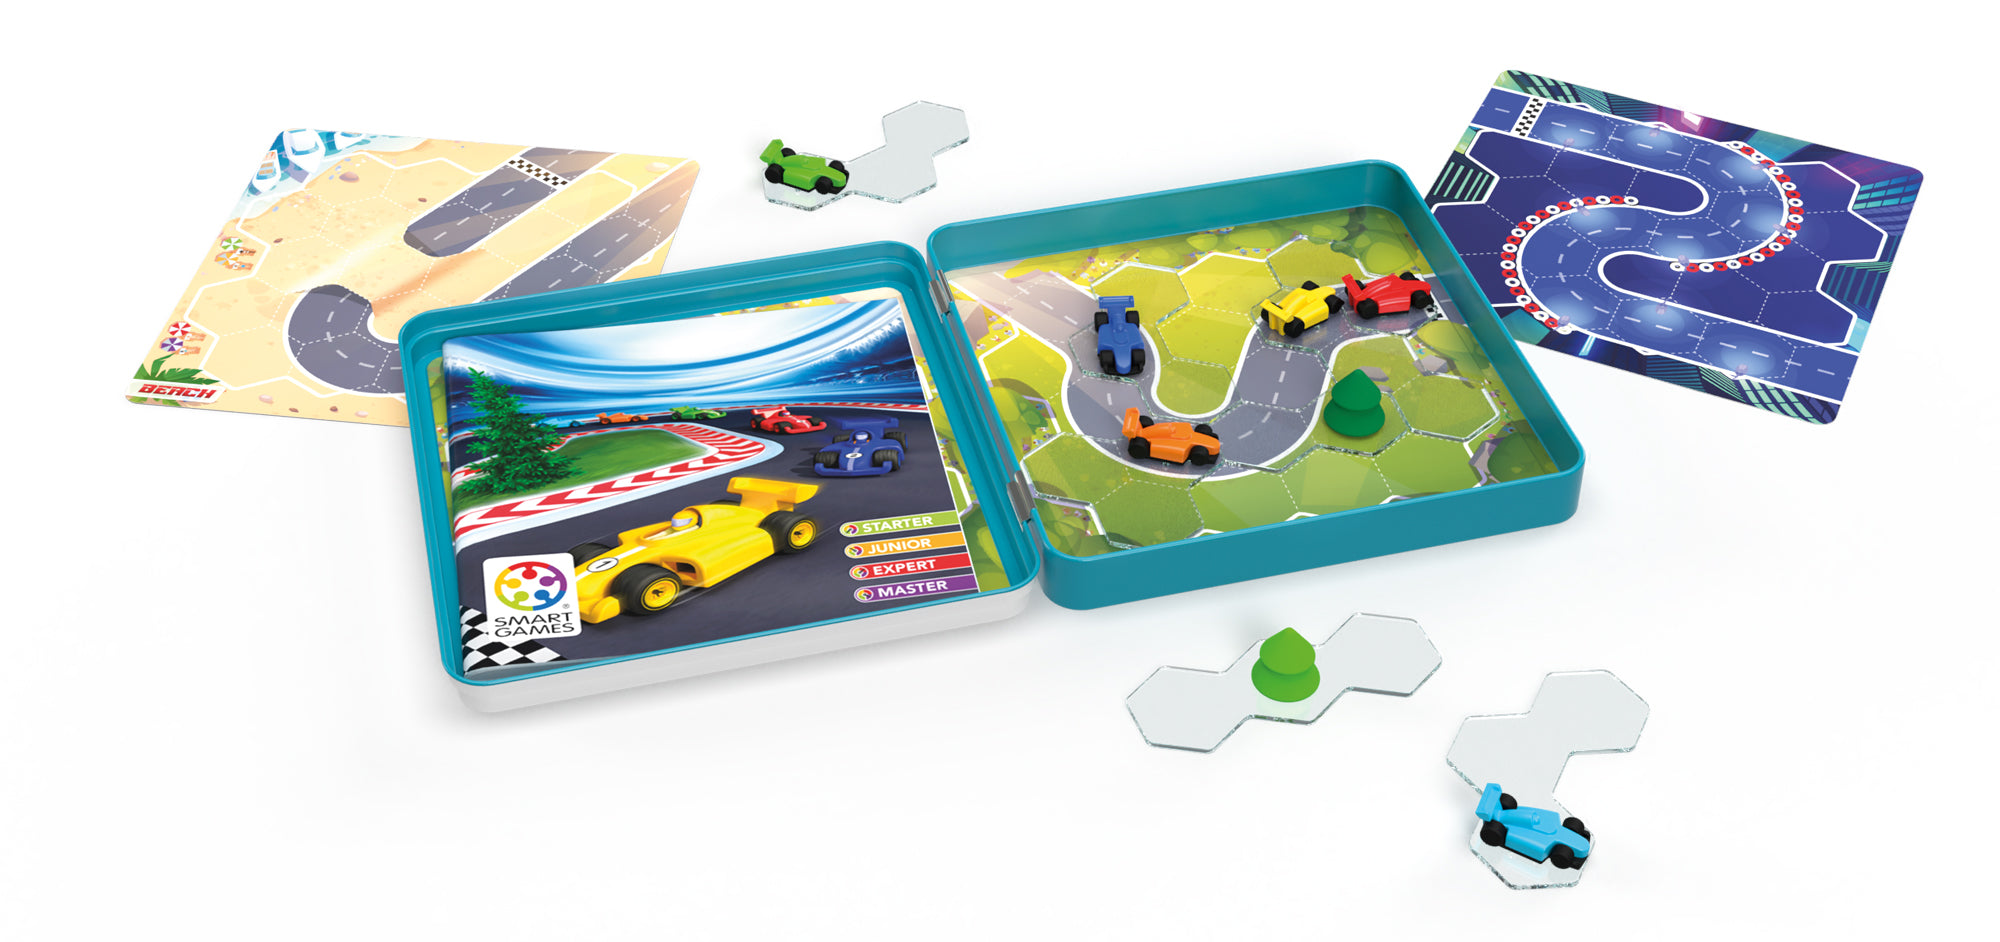 SmartGames Magnetic Travel Games: Pole Position